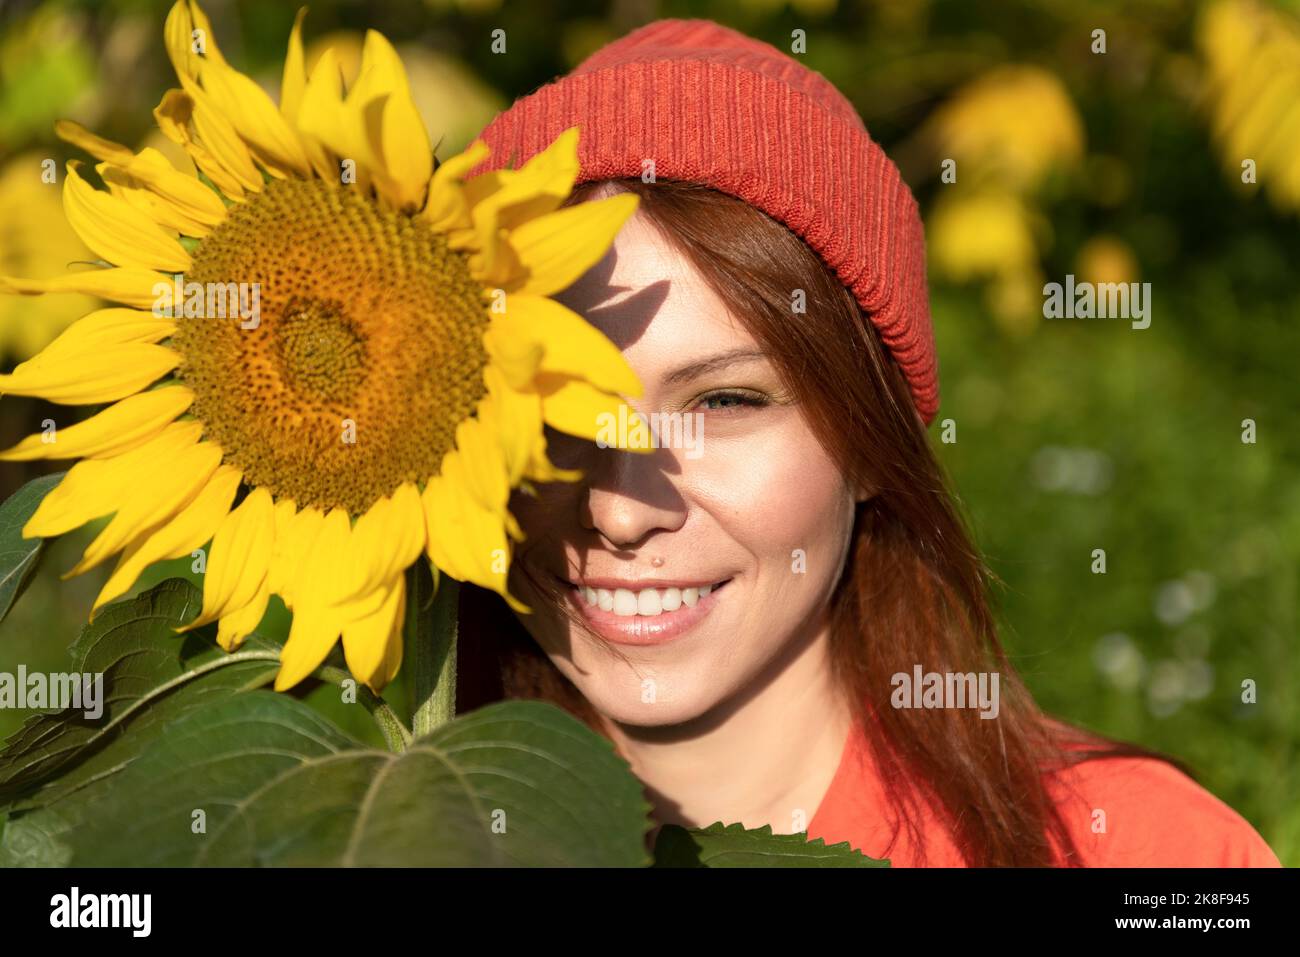 Smiling woman wearing knit hat holding sunflower on sunny day Stock Photo